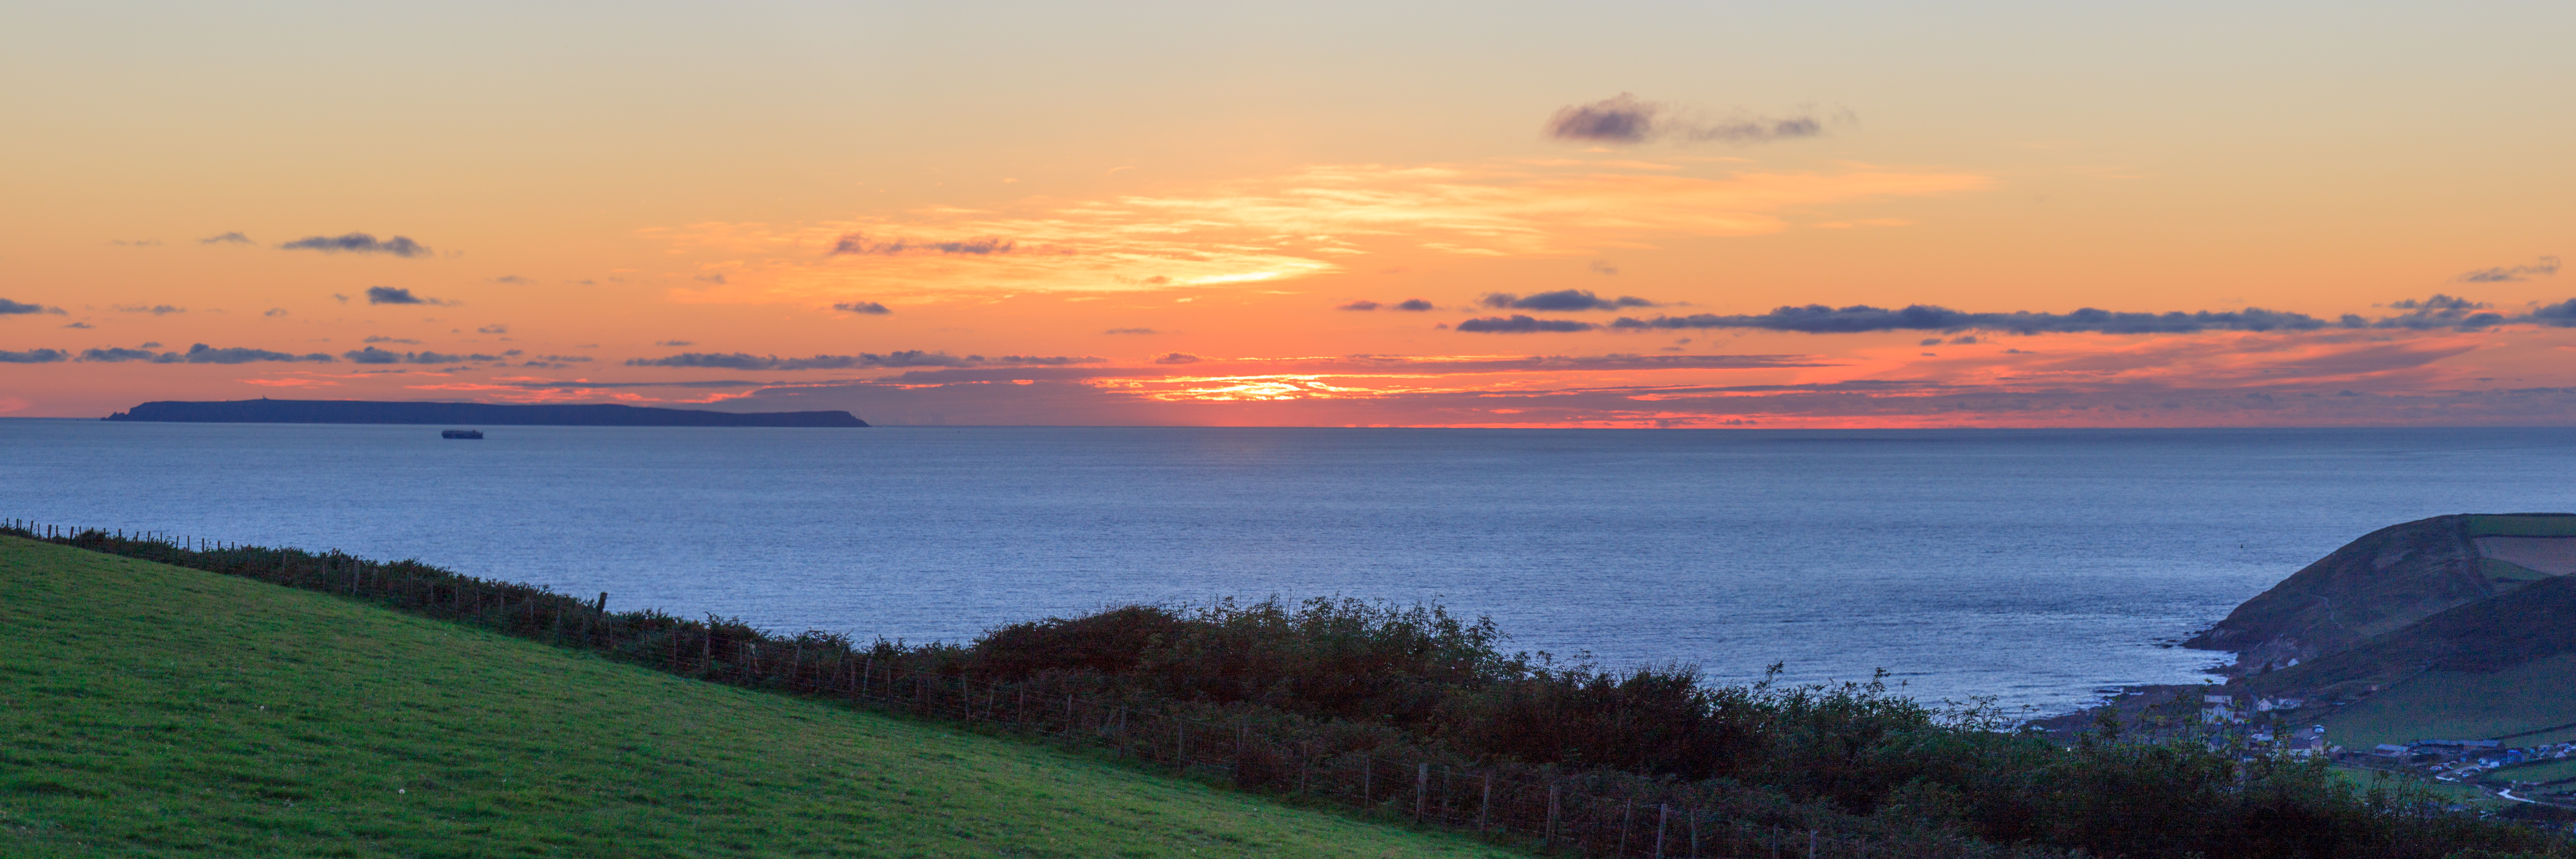 Croyde Bay with Lundy Island from Saunton Down at Sunset